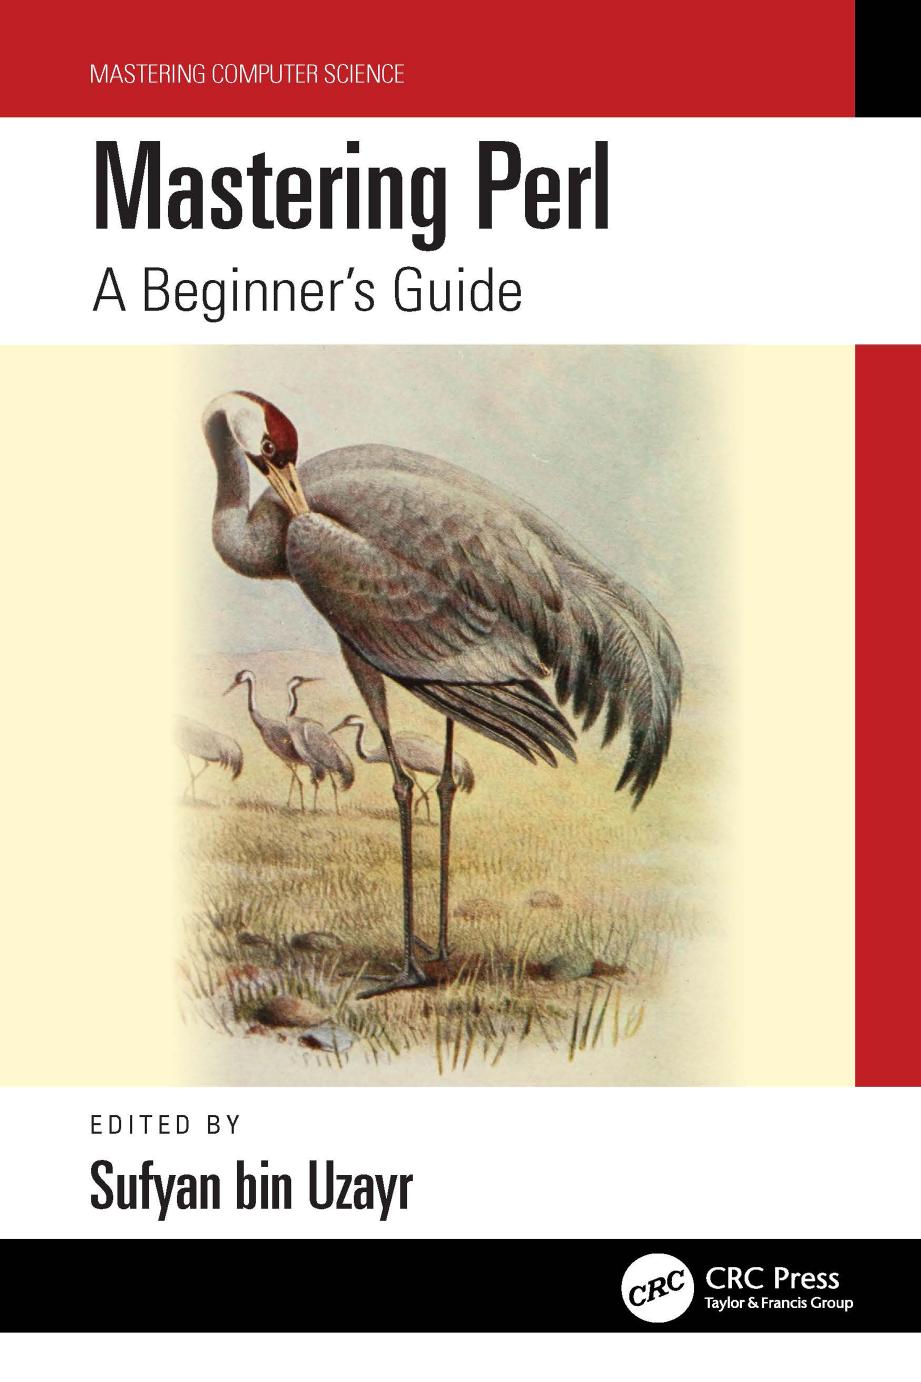 Mastering Perl: A Beginner’s Guide